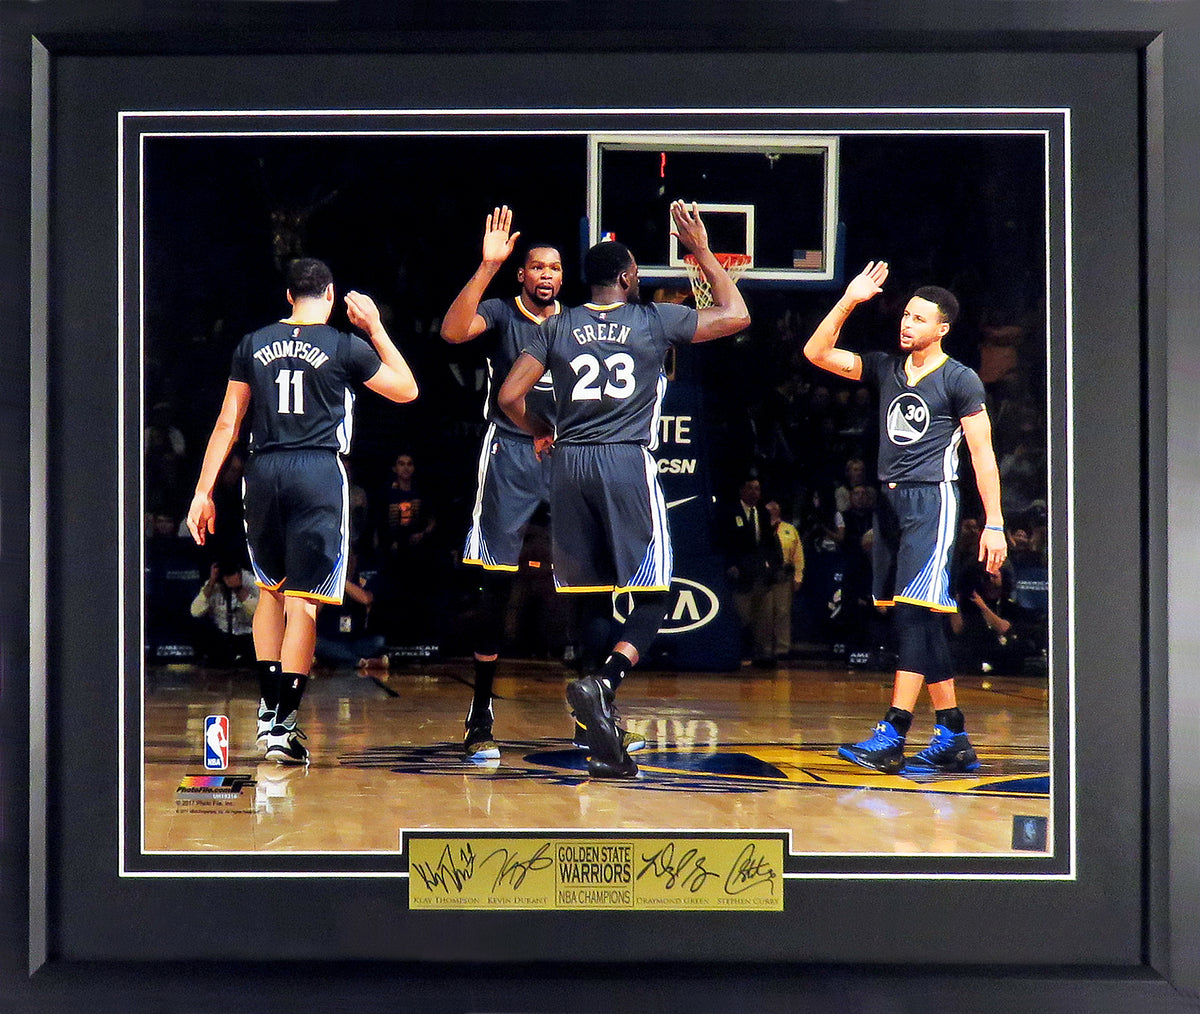 Draymond Green Klay Thompson Steph Curry Warriors Finals 8x10 Framed Photo  with Engraved Autographs